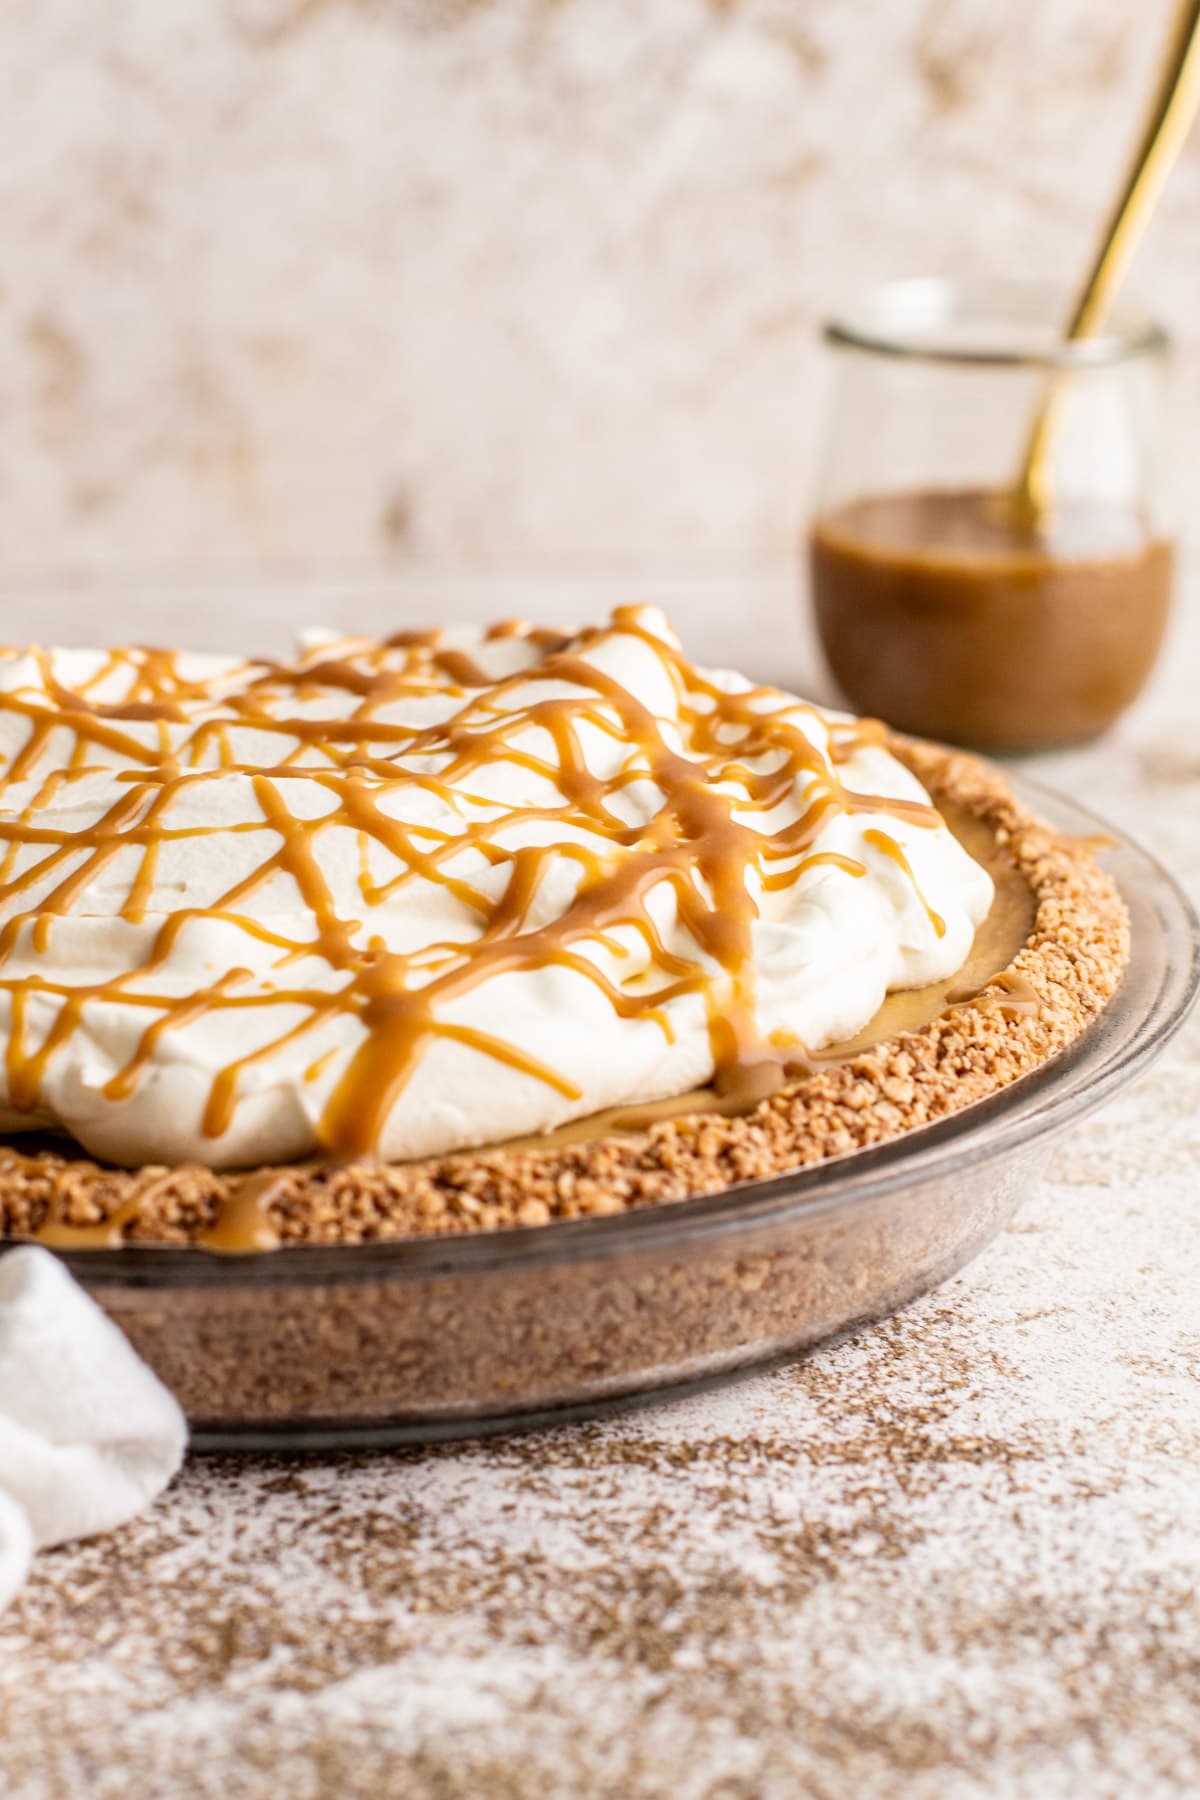 Butterscotch cream pie with whipped cream and a drizzle of butterscotch.